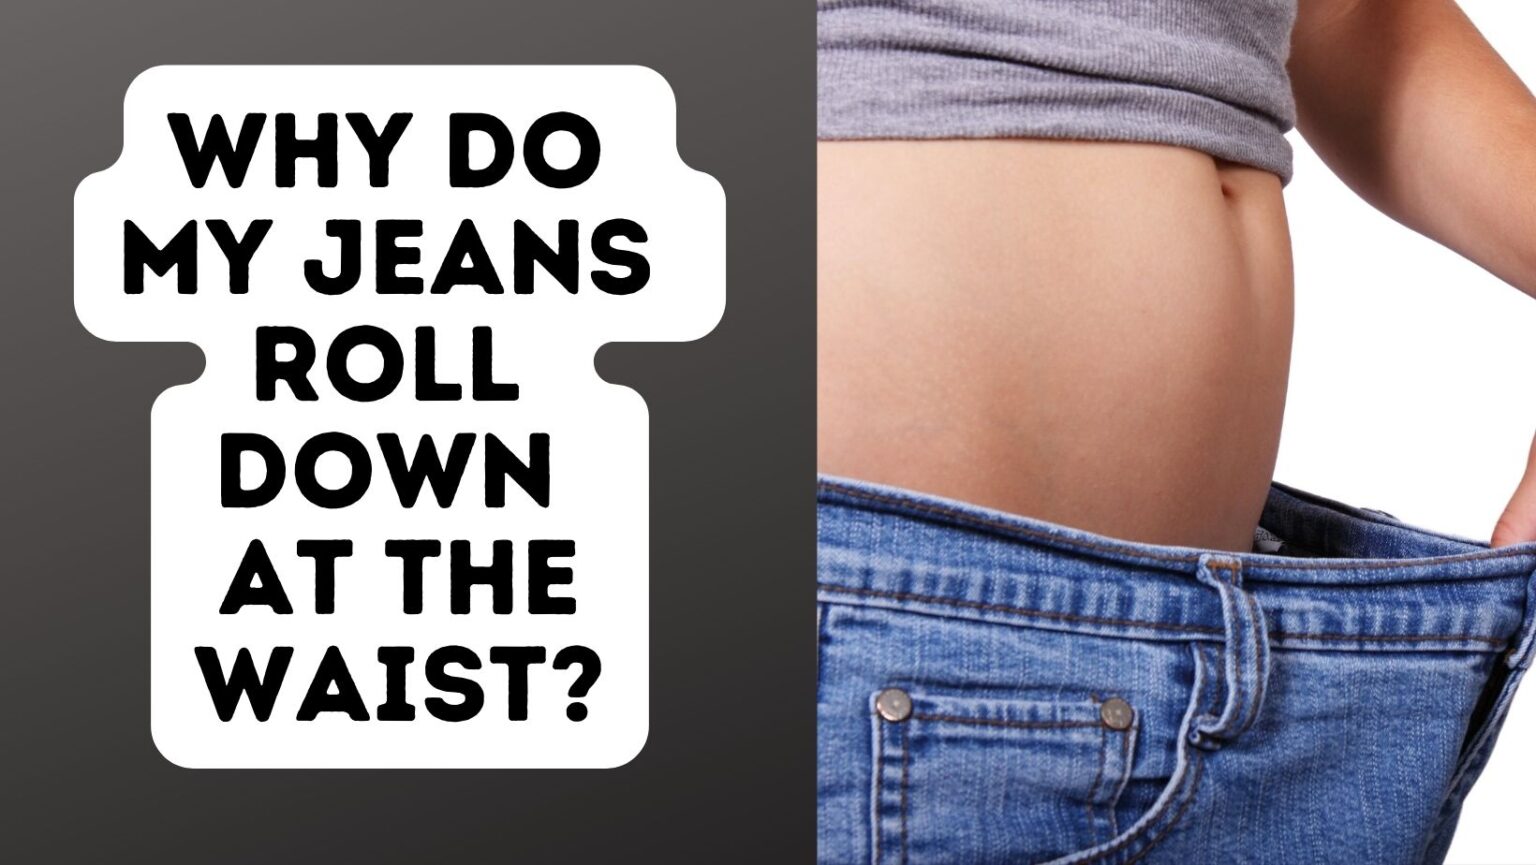 Why Do My Jeans Roll Down At The Waist? (Reasons/Solutions) [Answered ...